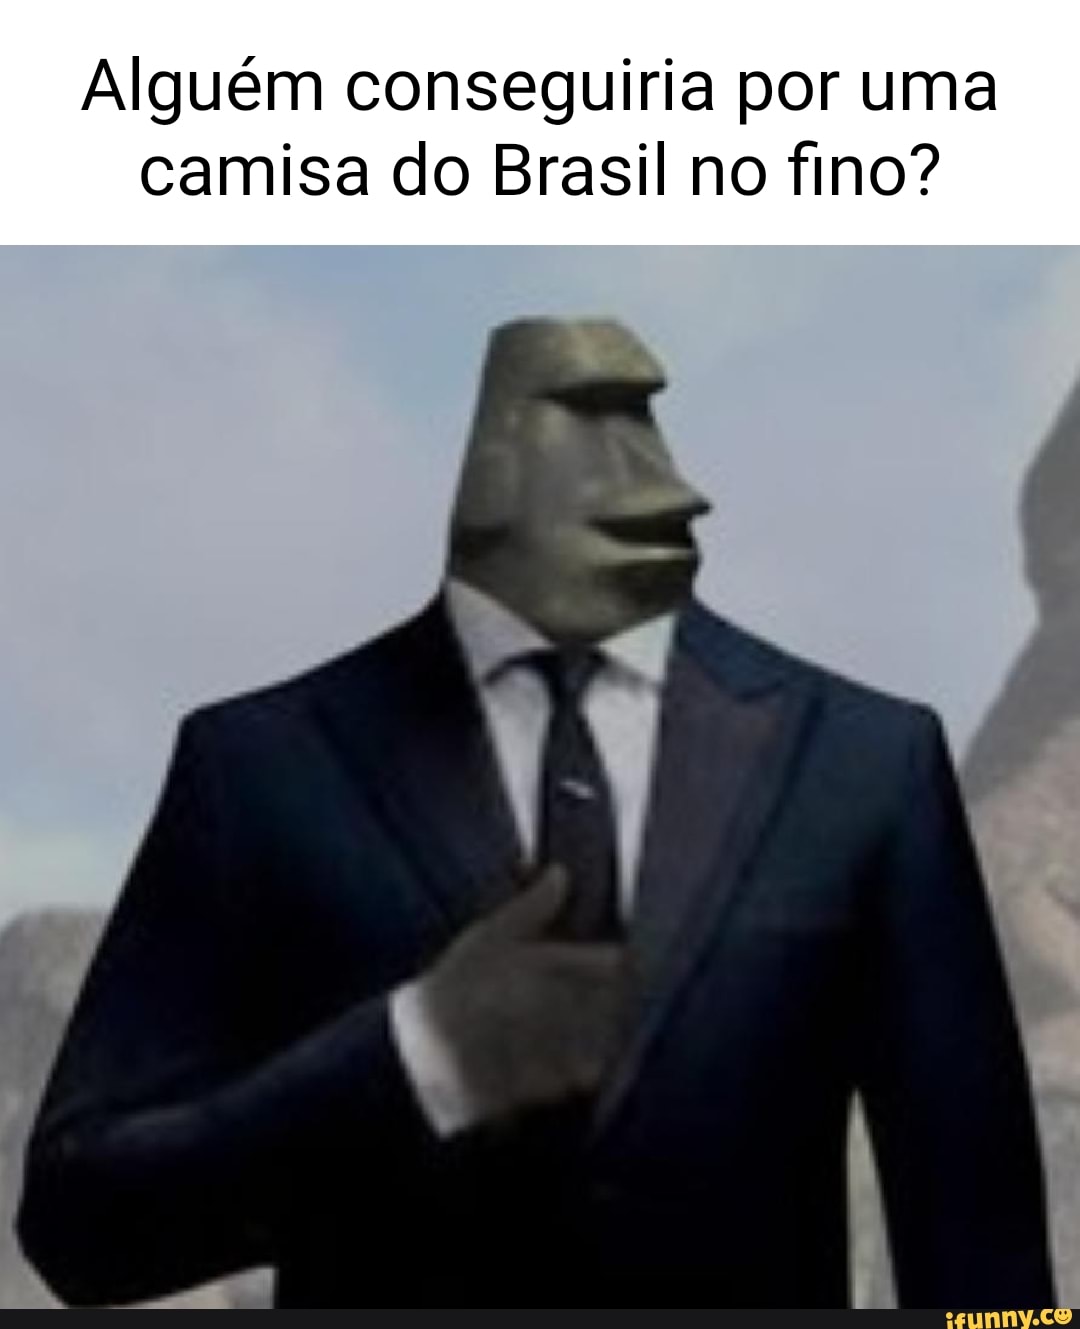 Finosenores memes. Best Collection of funny Finosenores pictures on iFunny  Brazil